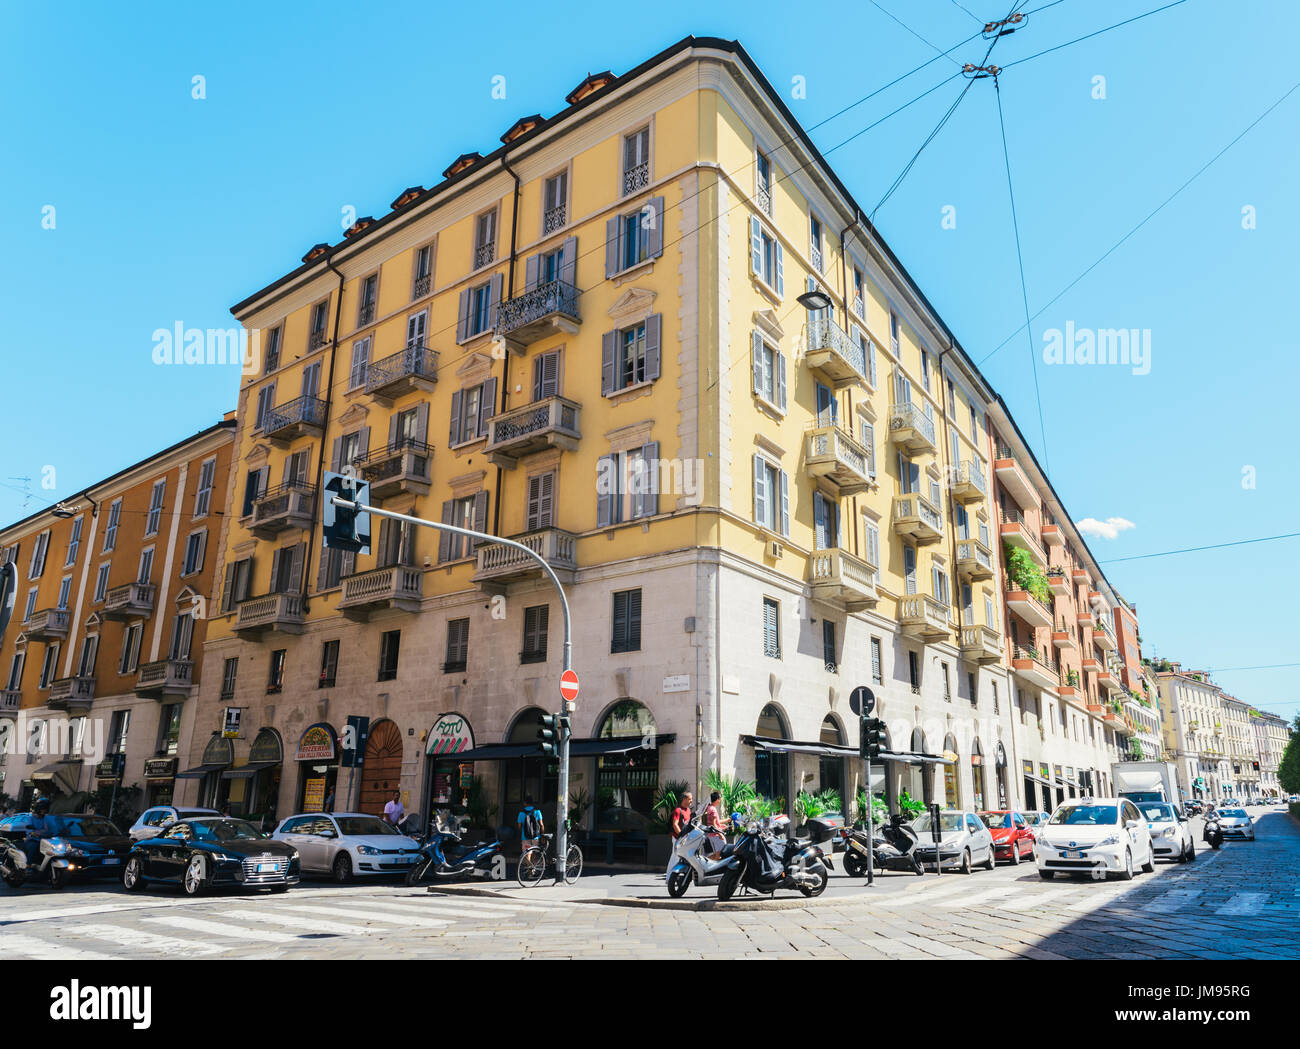 Milan, Italy - July 25th, 2017: A busy street corner in Milan, Italy during the summer Stock Photo